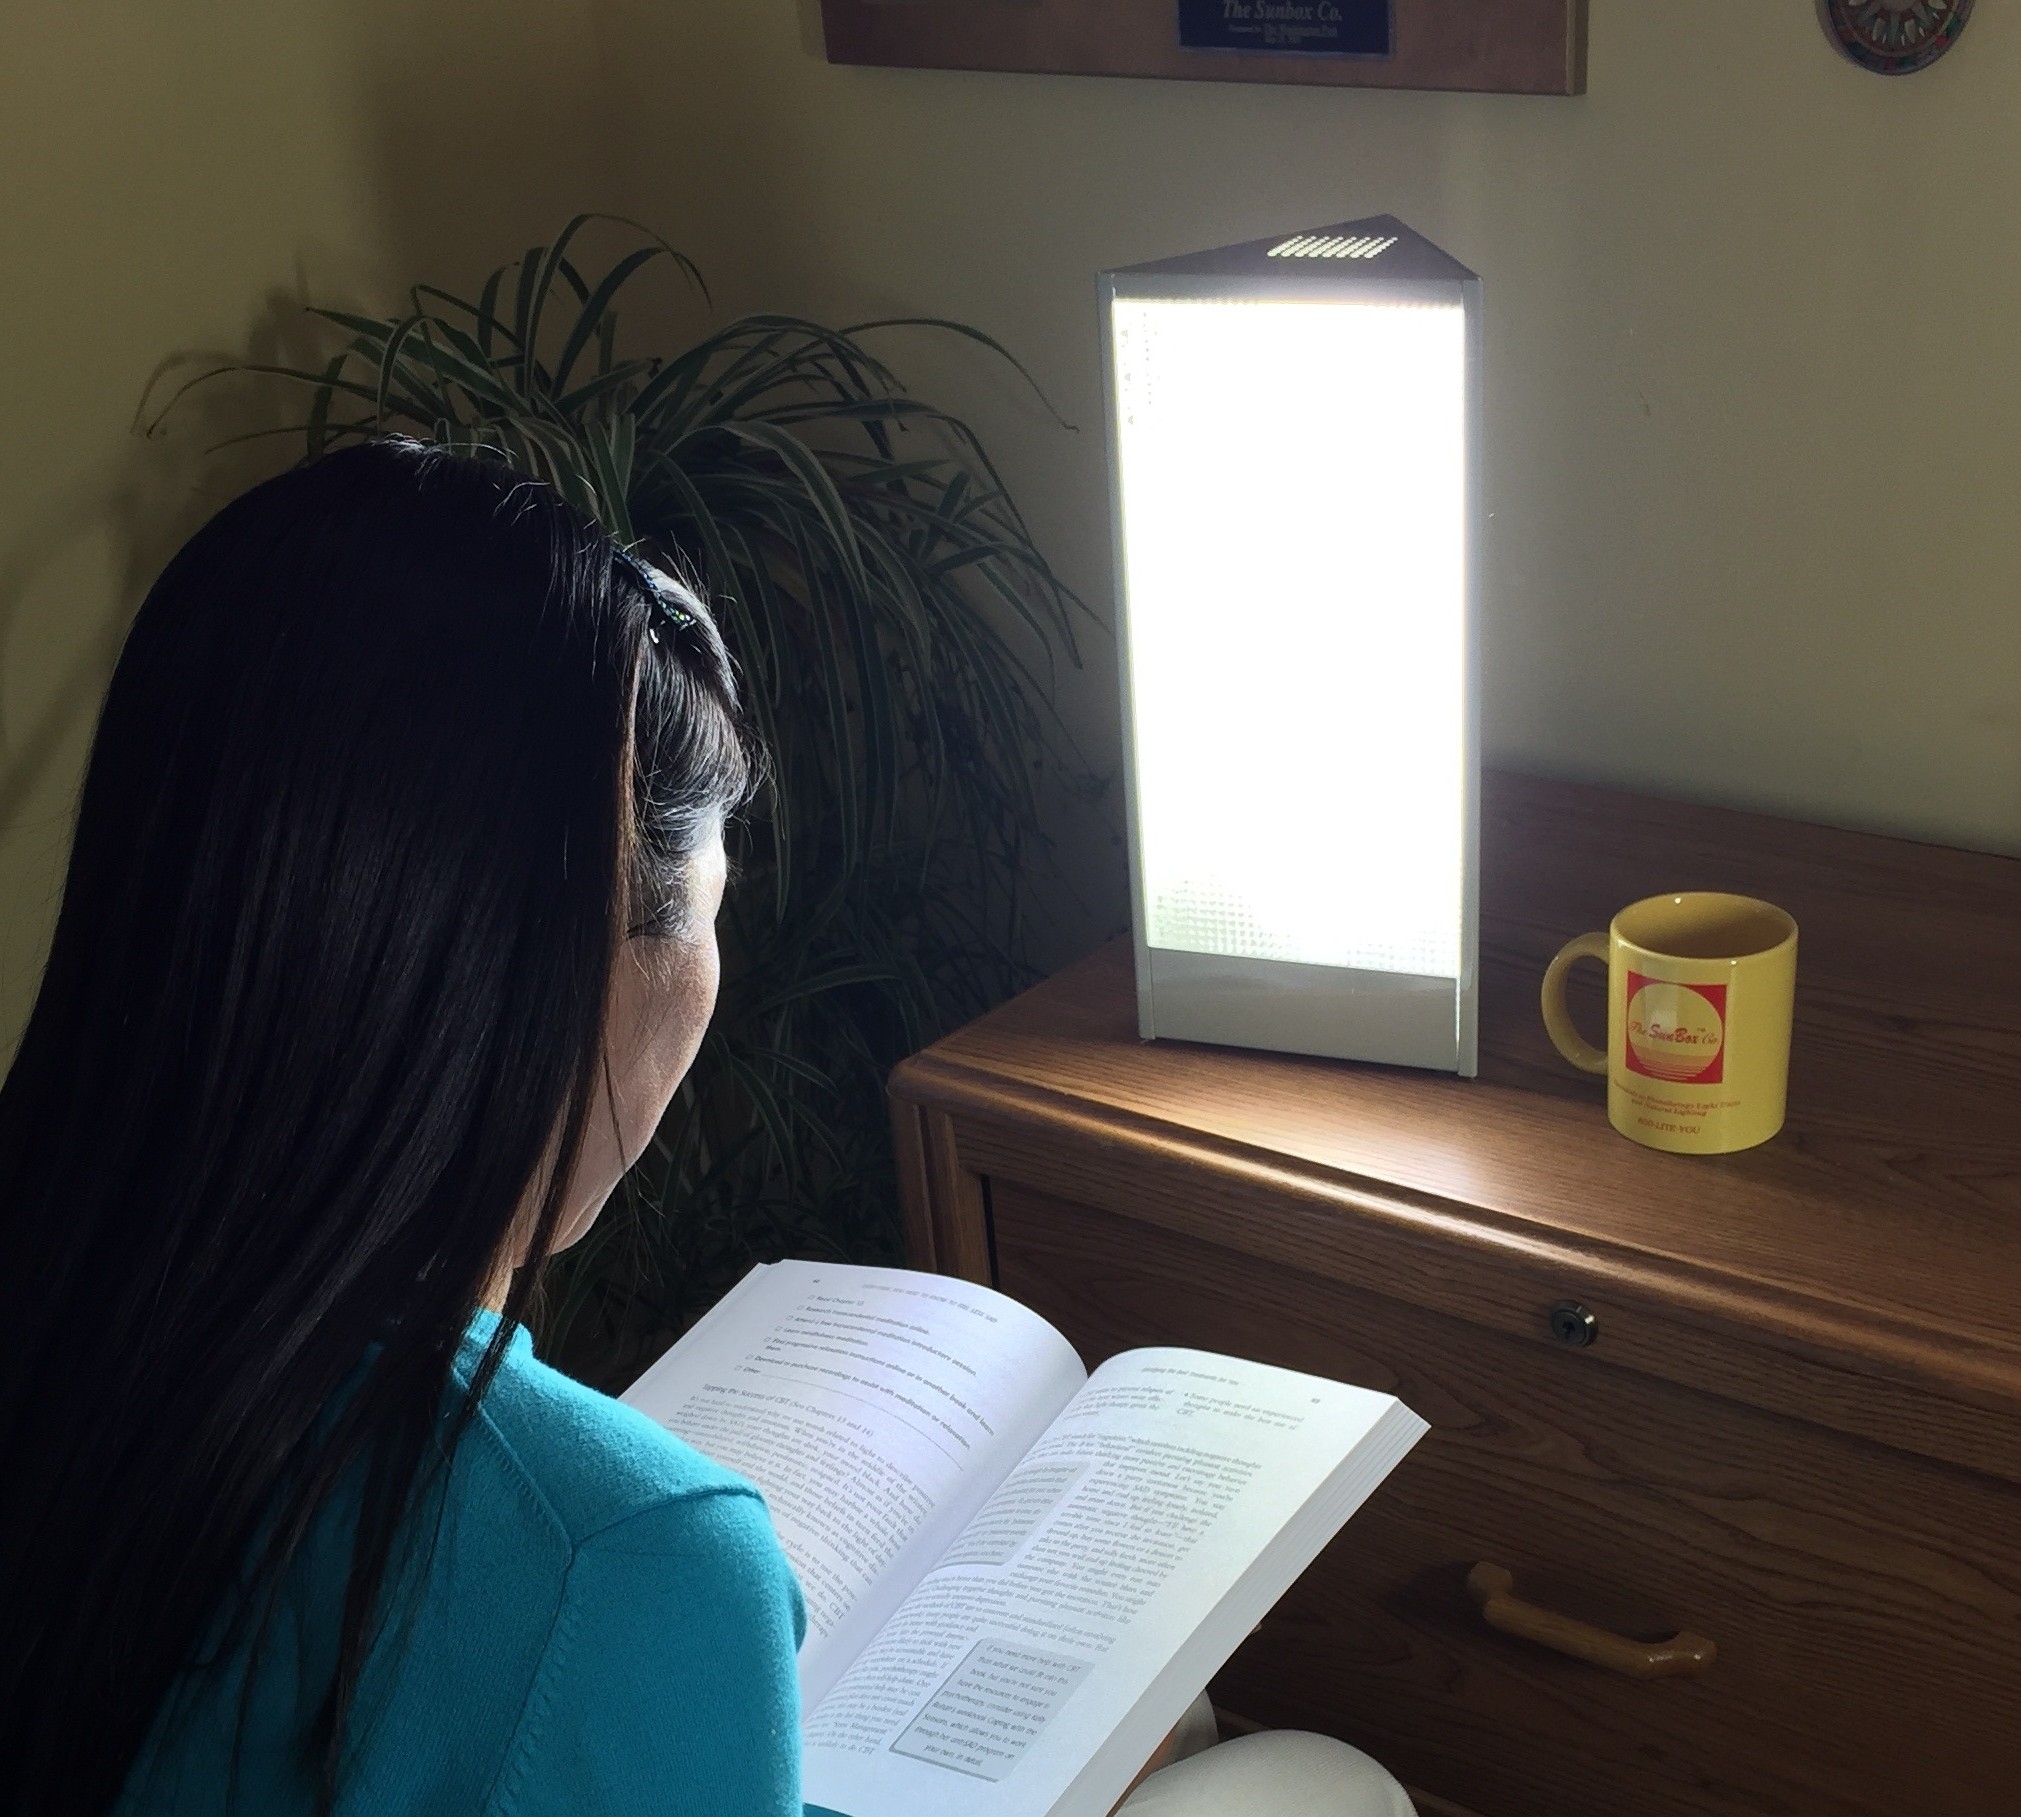 SunLight Jr- Bright Light Therapy Lamp - The SunBox